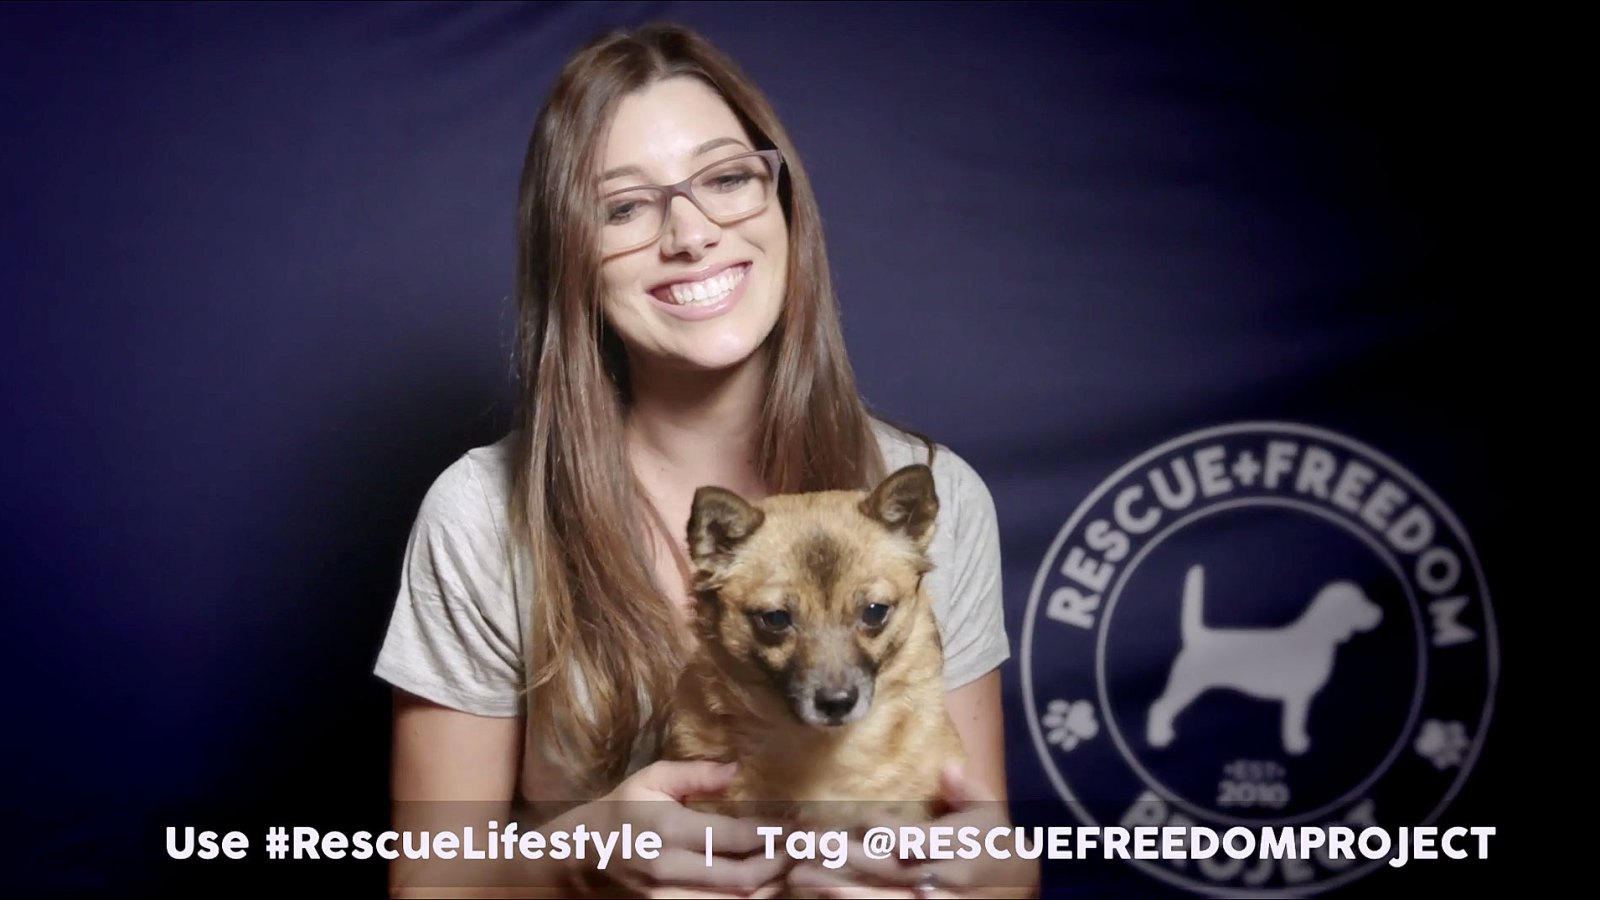 #RescueLifestyle: Share Your Pet's Story